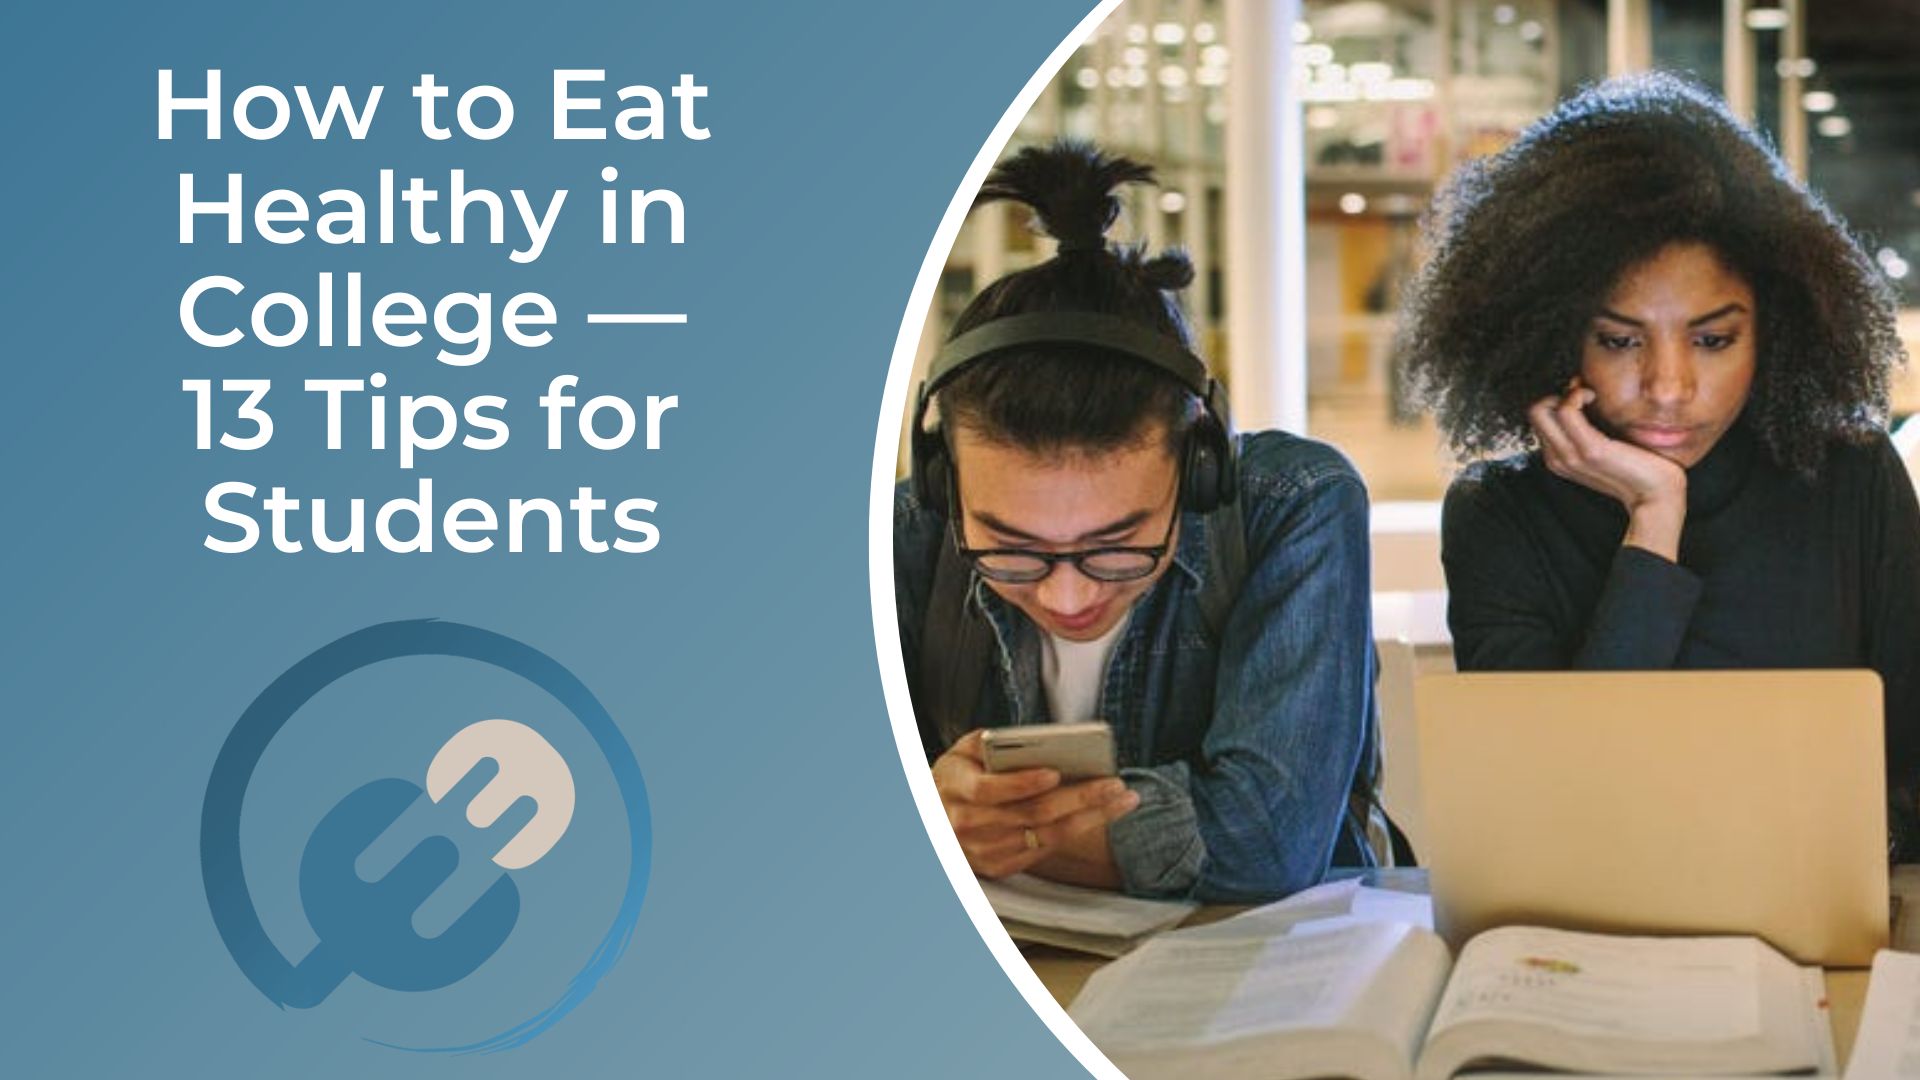 How to Eat Healthy in College — 13 Tips for Students